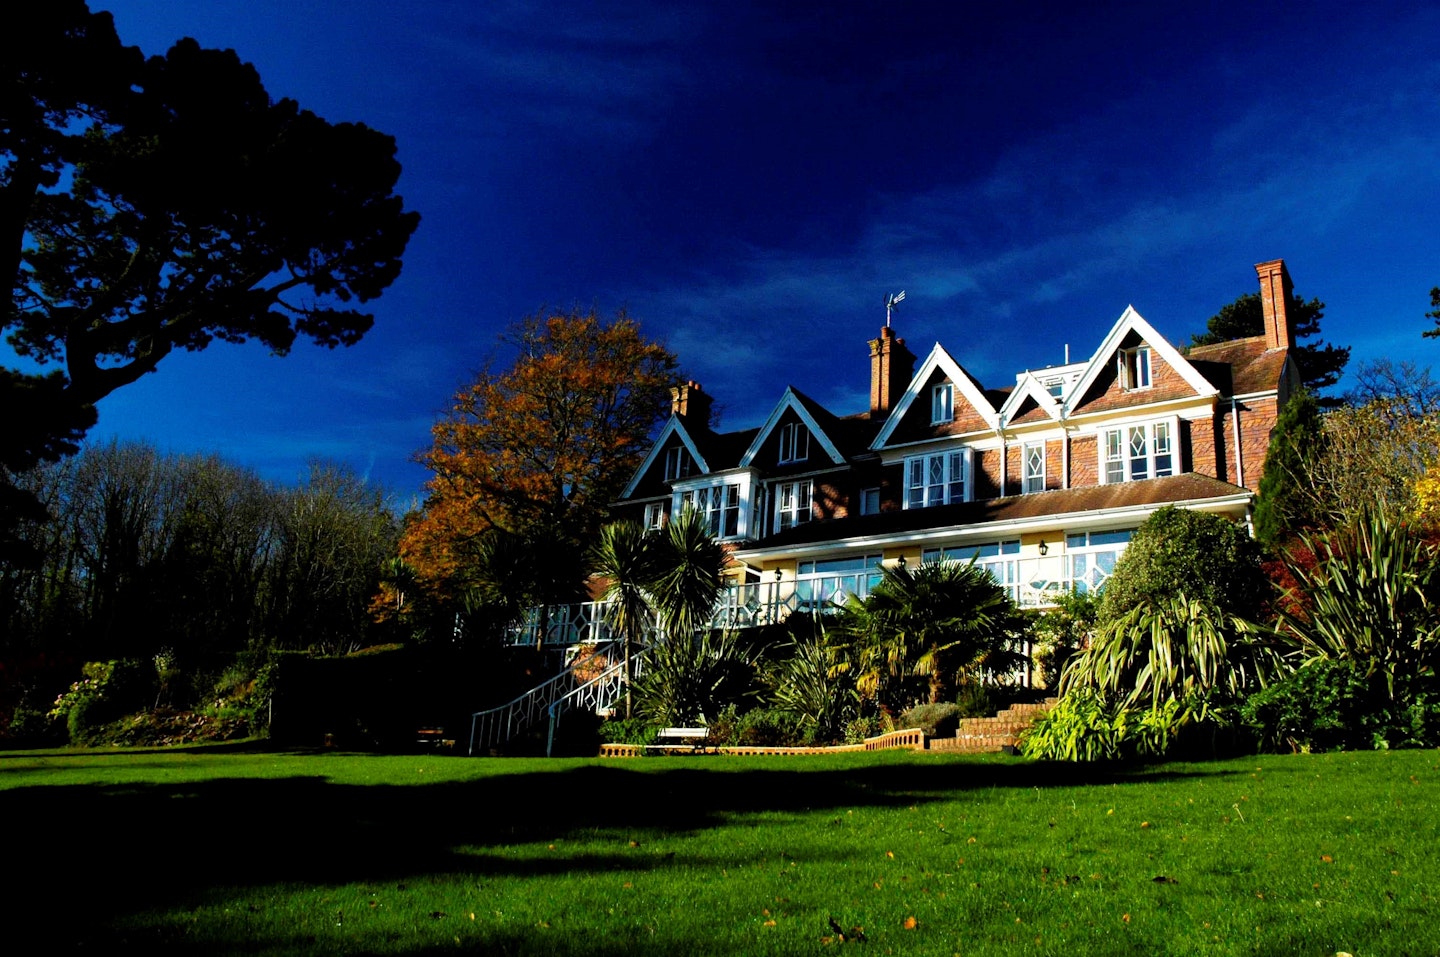 Orestone Manor is known as one of the most beautiful places to stay in Devon